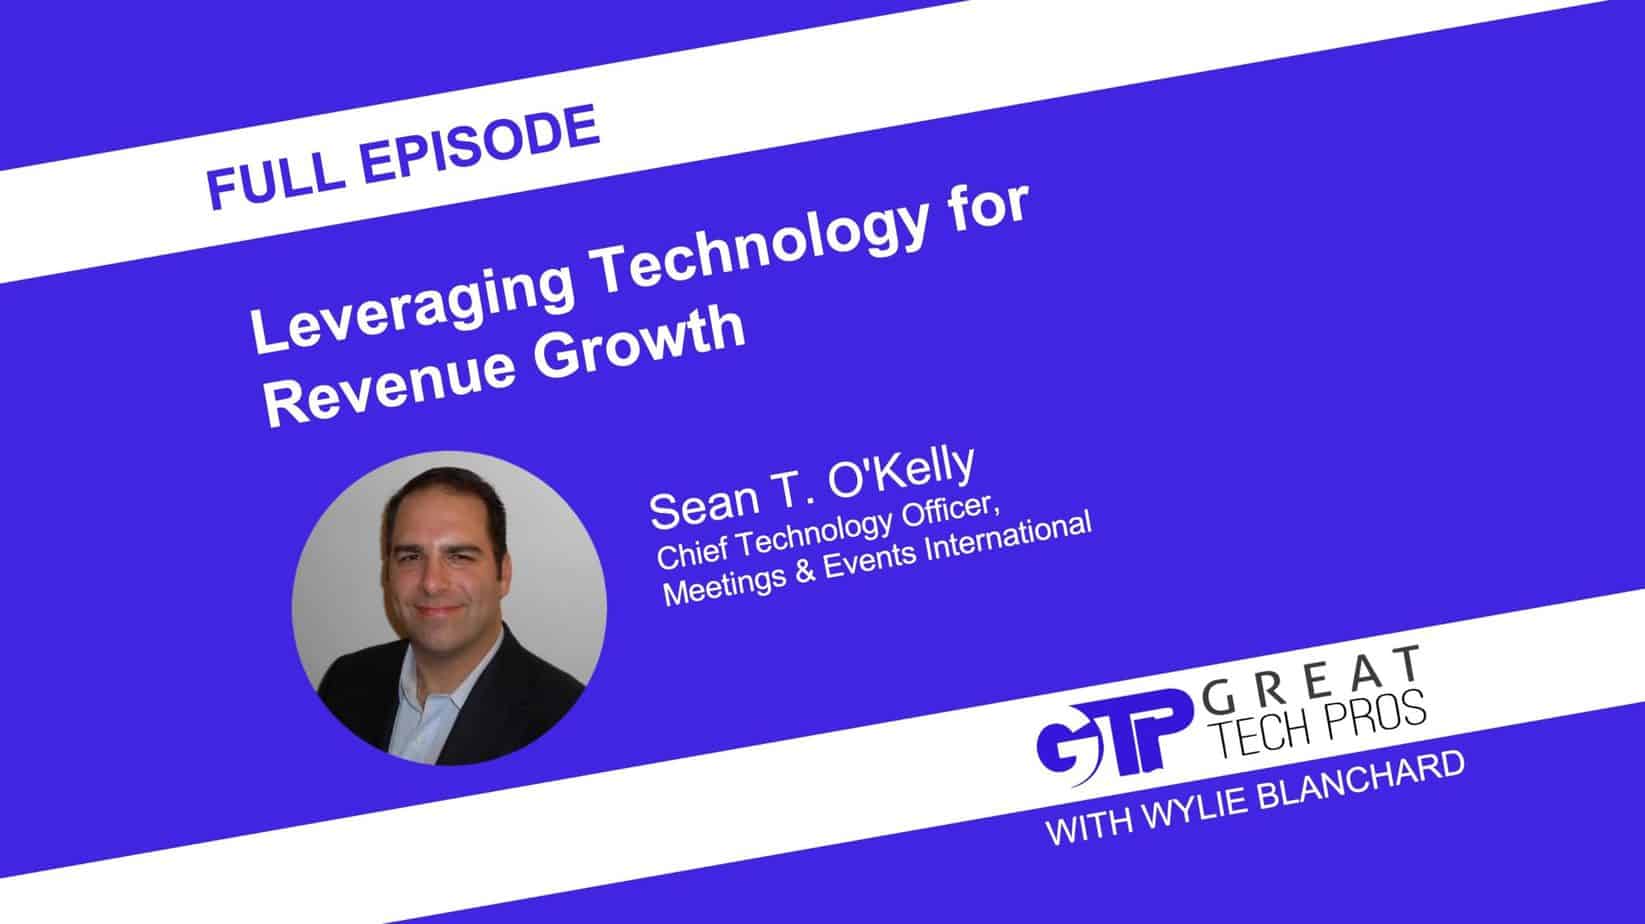 Discussion with Sean T. O’Kelly: Leveraging Technology for Revenue Growth